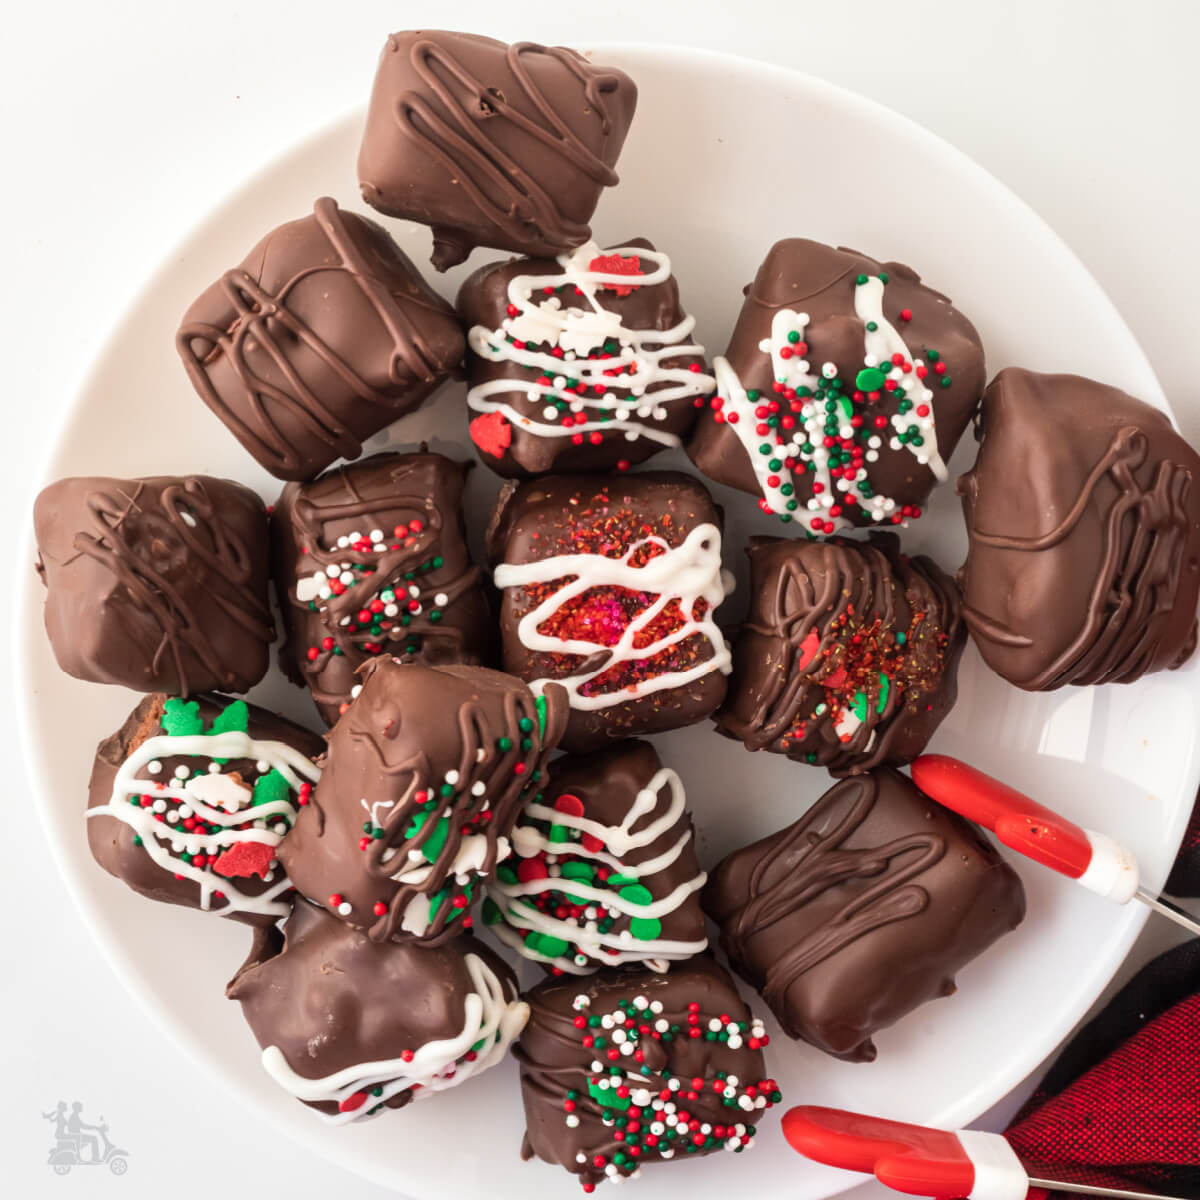 Cool Whip Frozen Chocolate Truffle candy decorated red and green sugar.